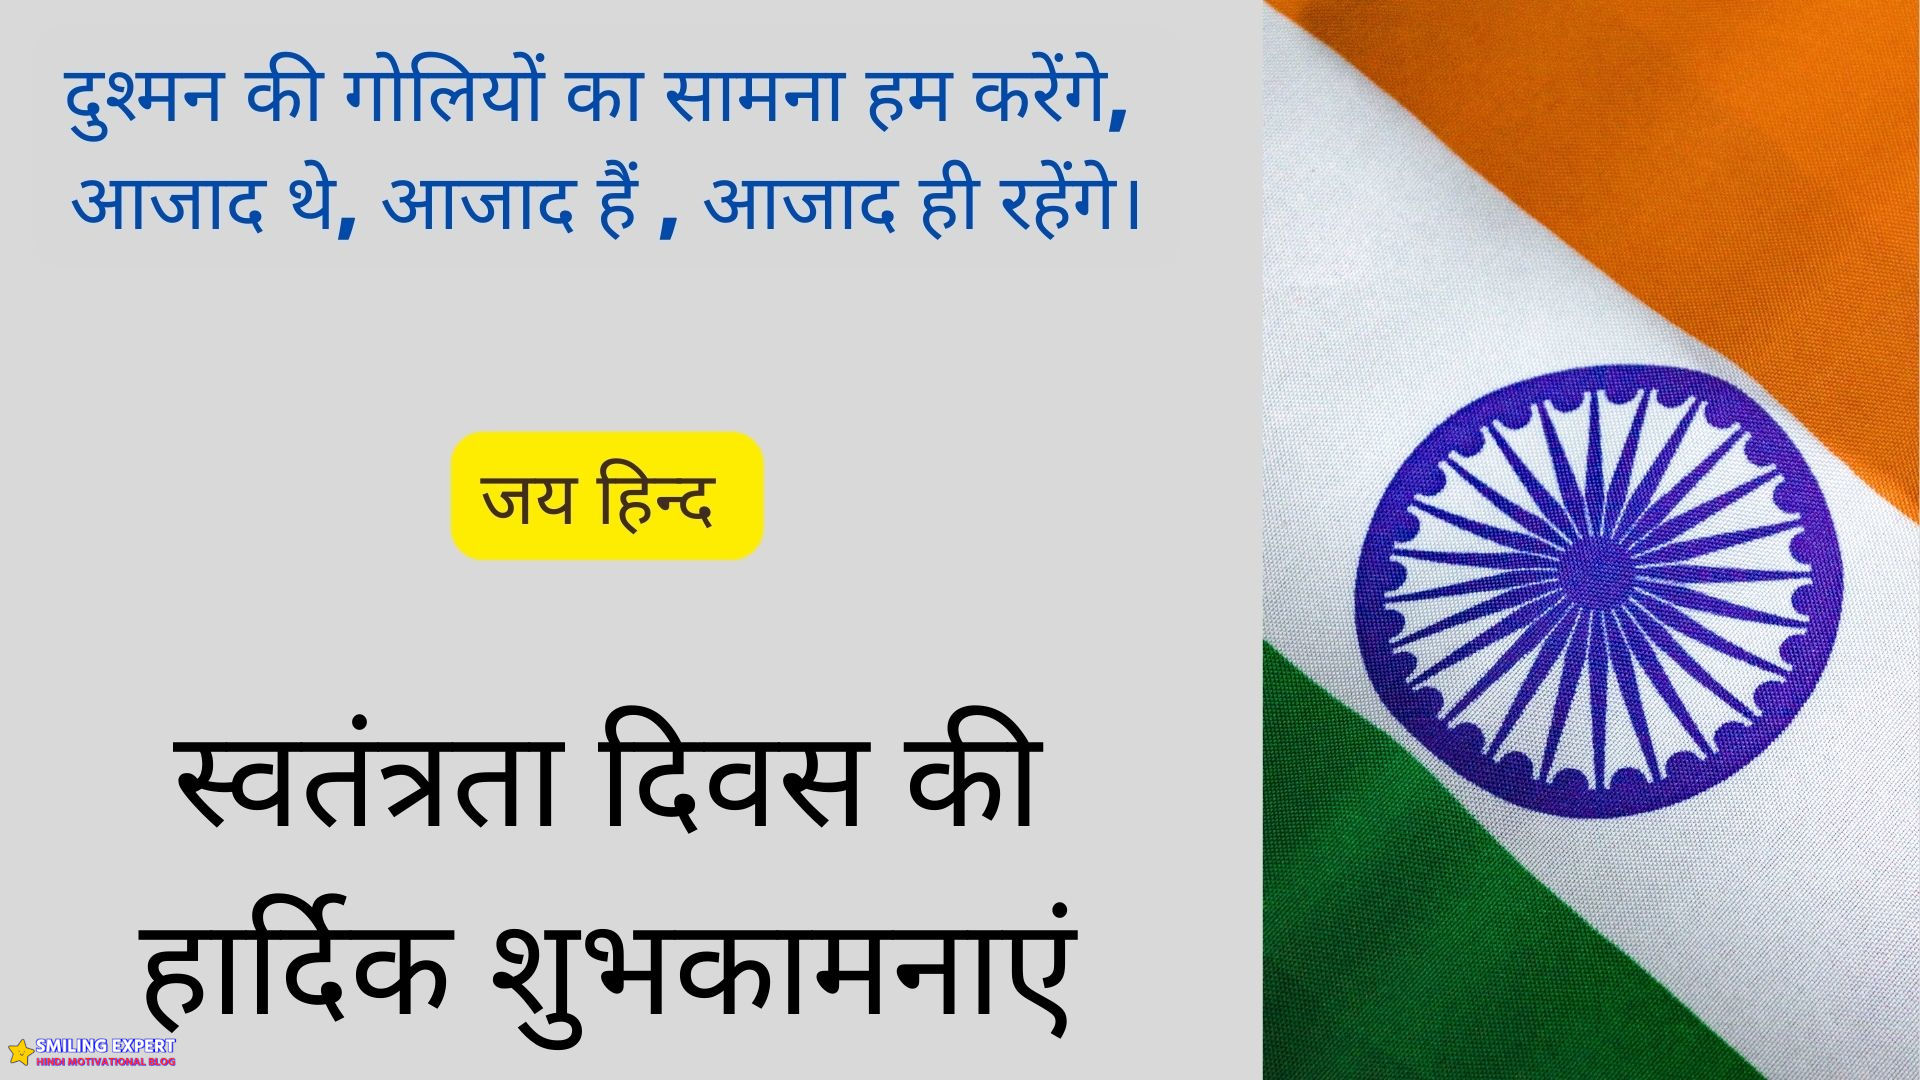 quotes of independence day in hindi 